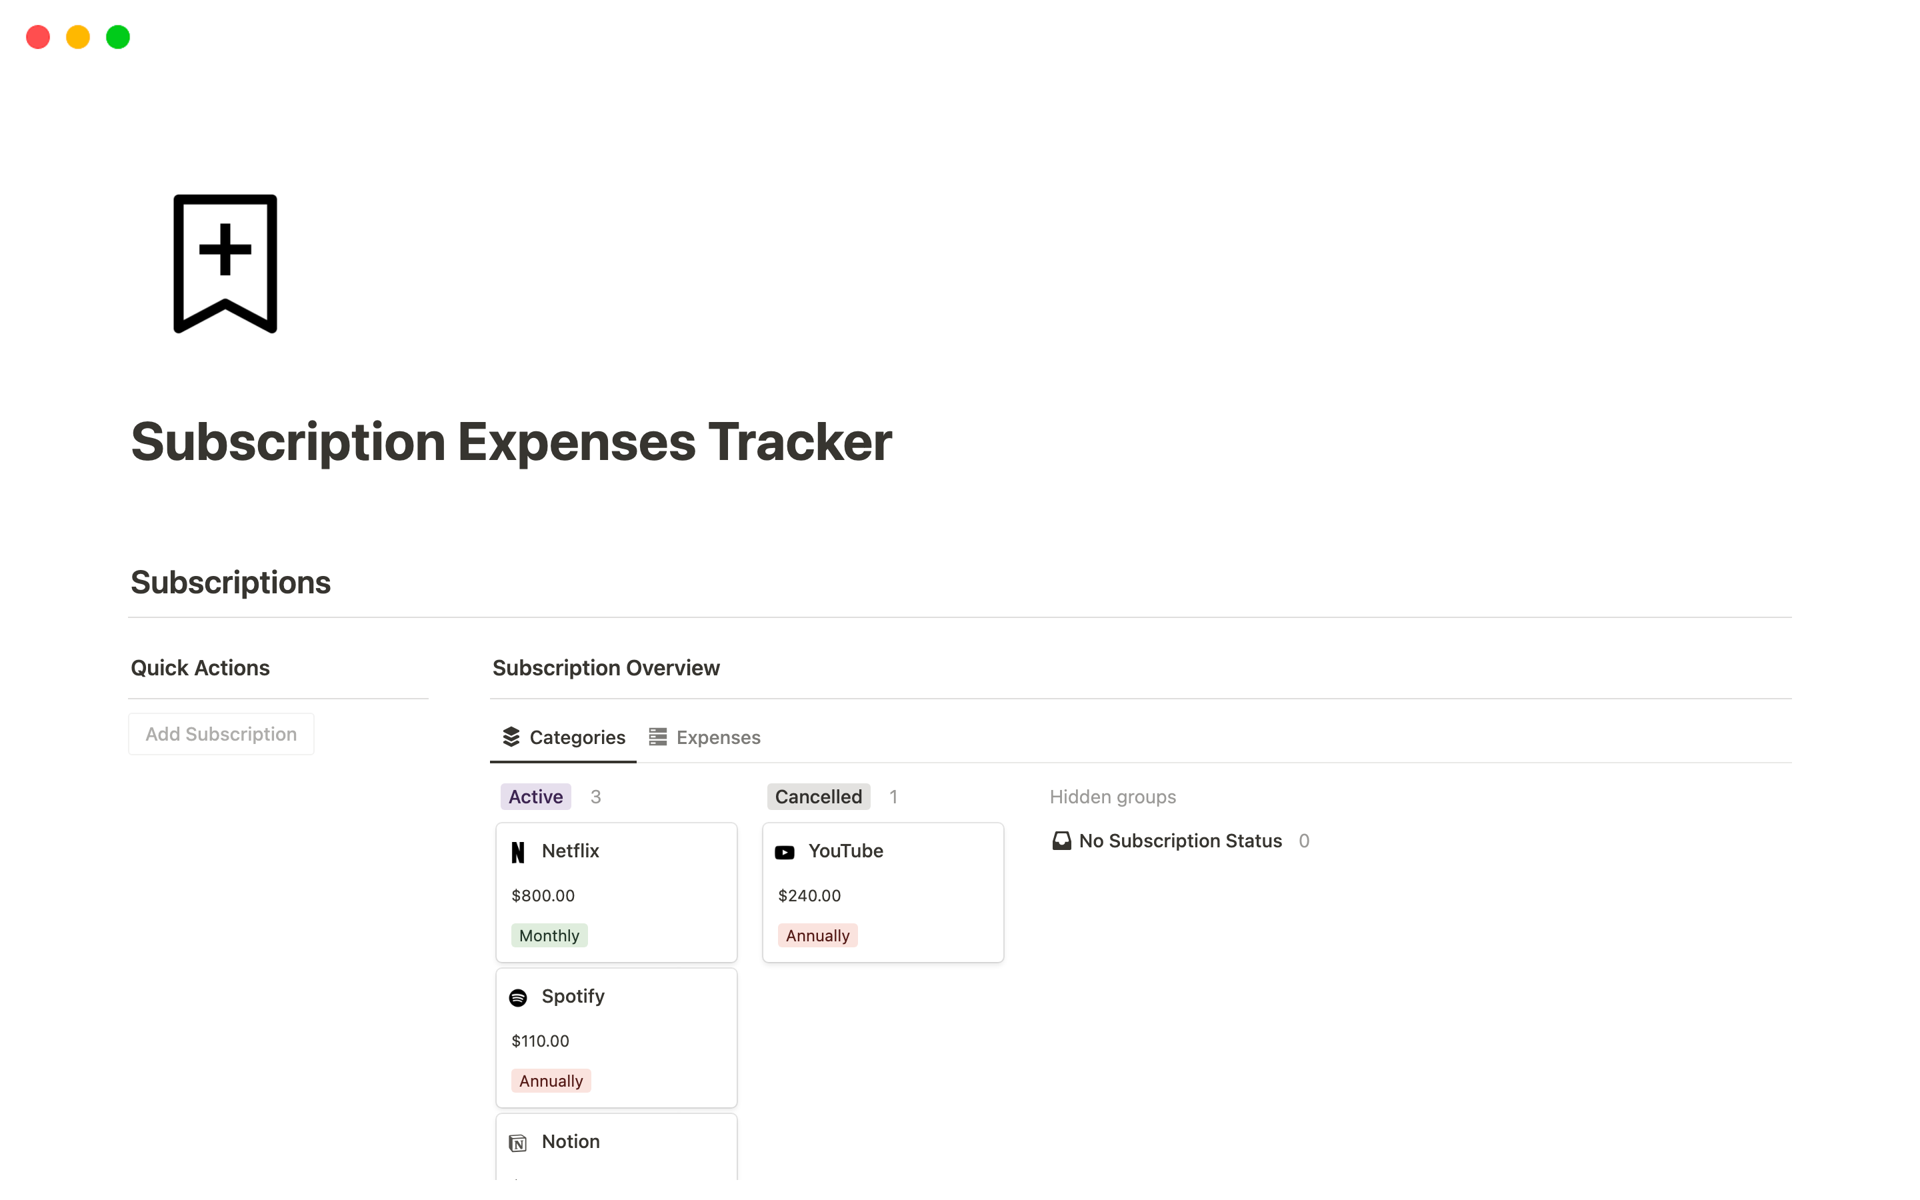 Only tool you need to track your subscription expenses, status of subscription and pay bills on time